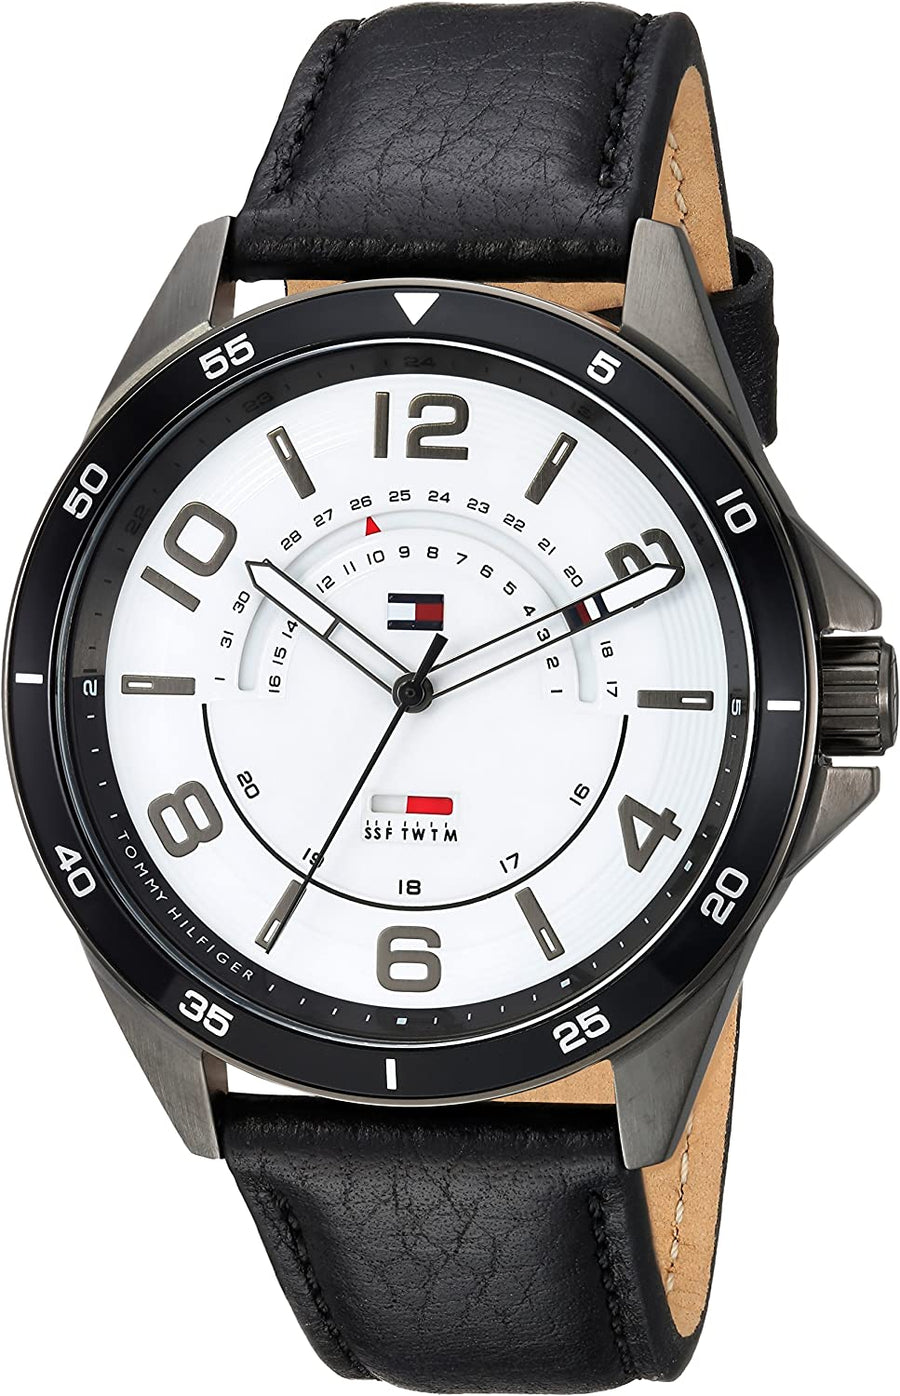 Tommy Hilfiger Mens Quartz Watch, Analog Display and Leather Strap 1791396 - 3alababak